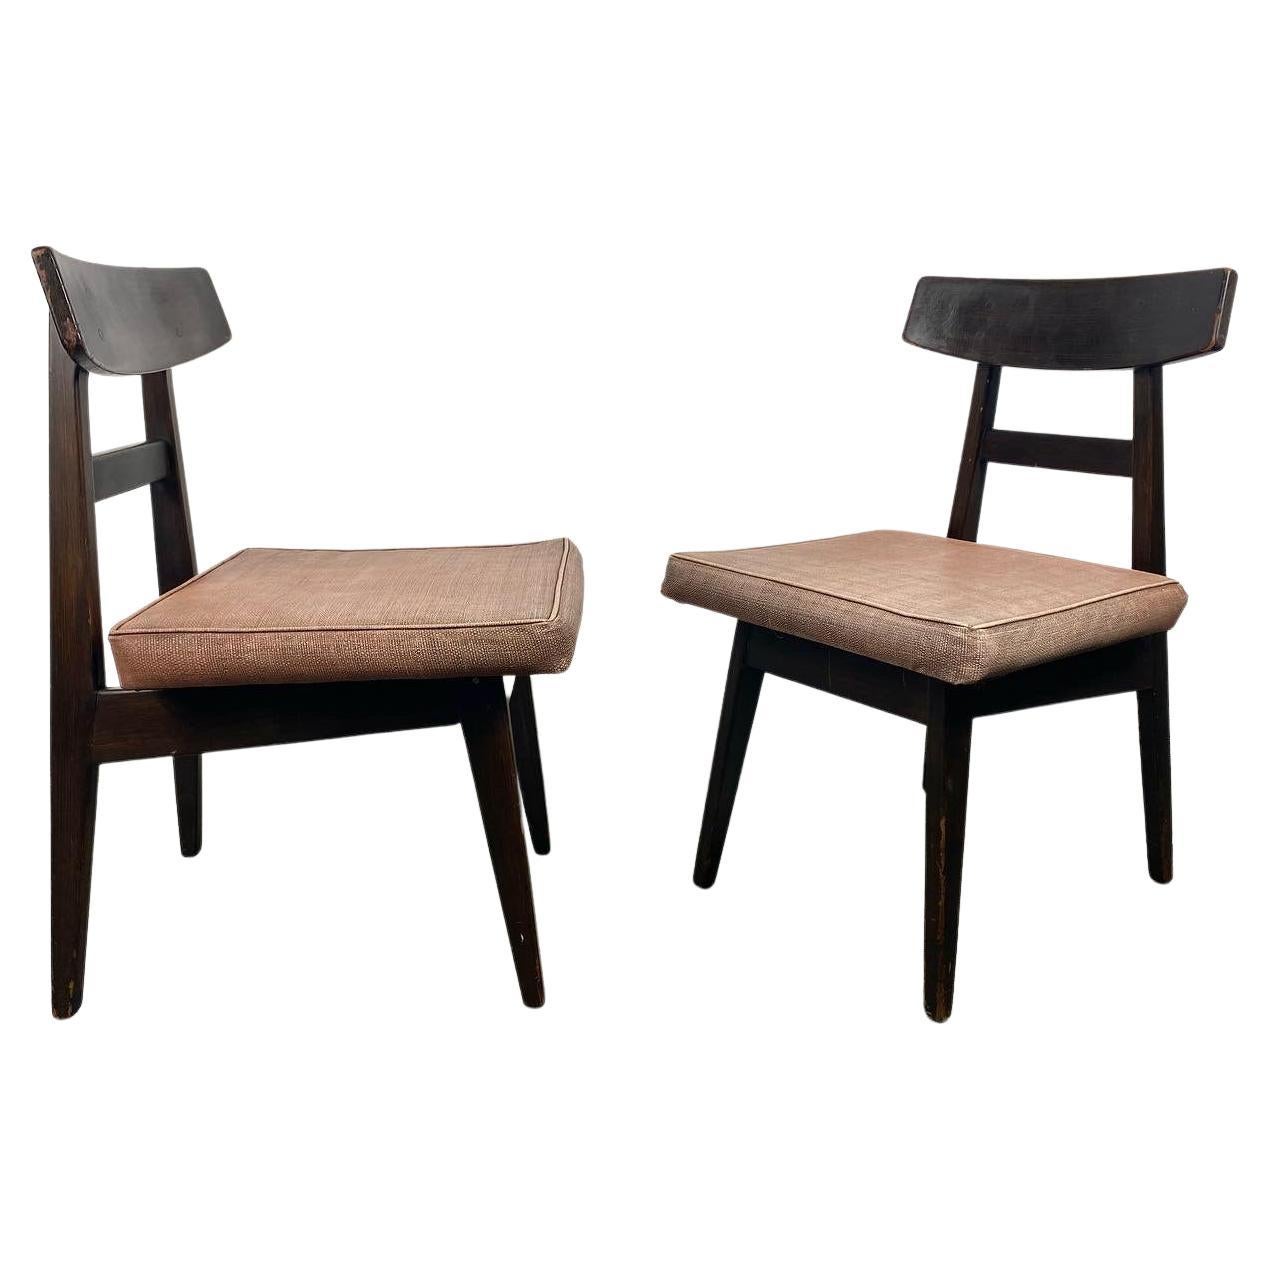 Extremely Rare Asian Inspired Modernist Side Chairs Designed by Jens Risom For Sale